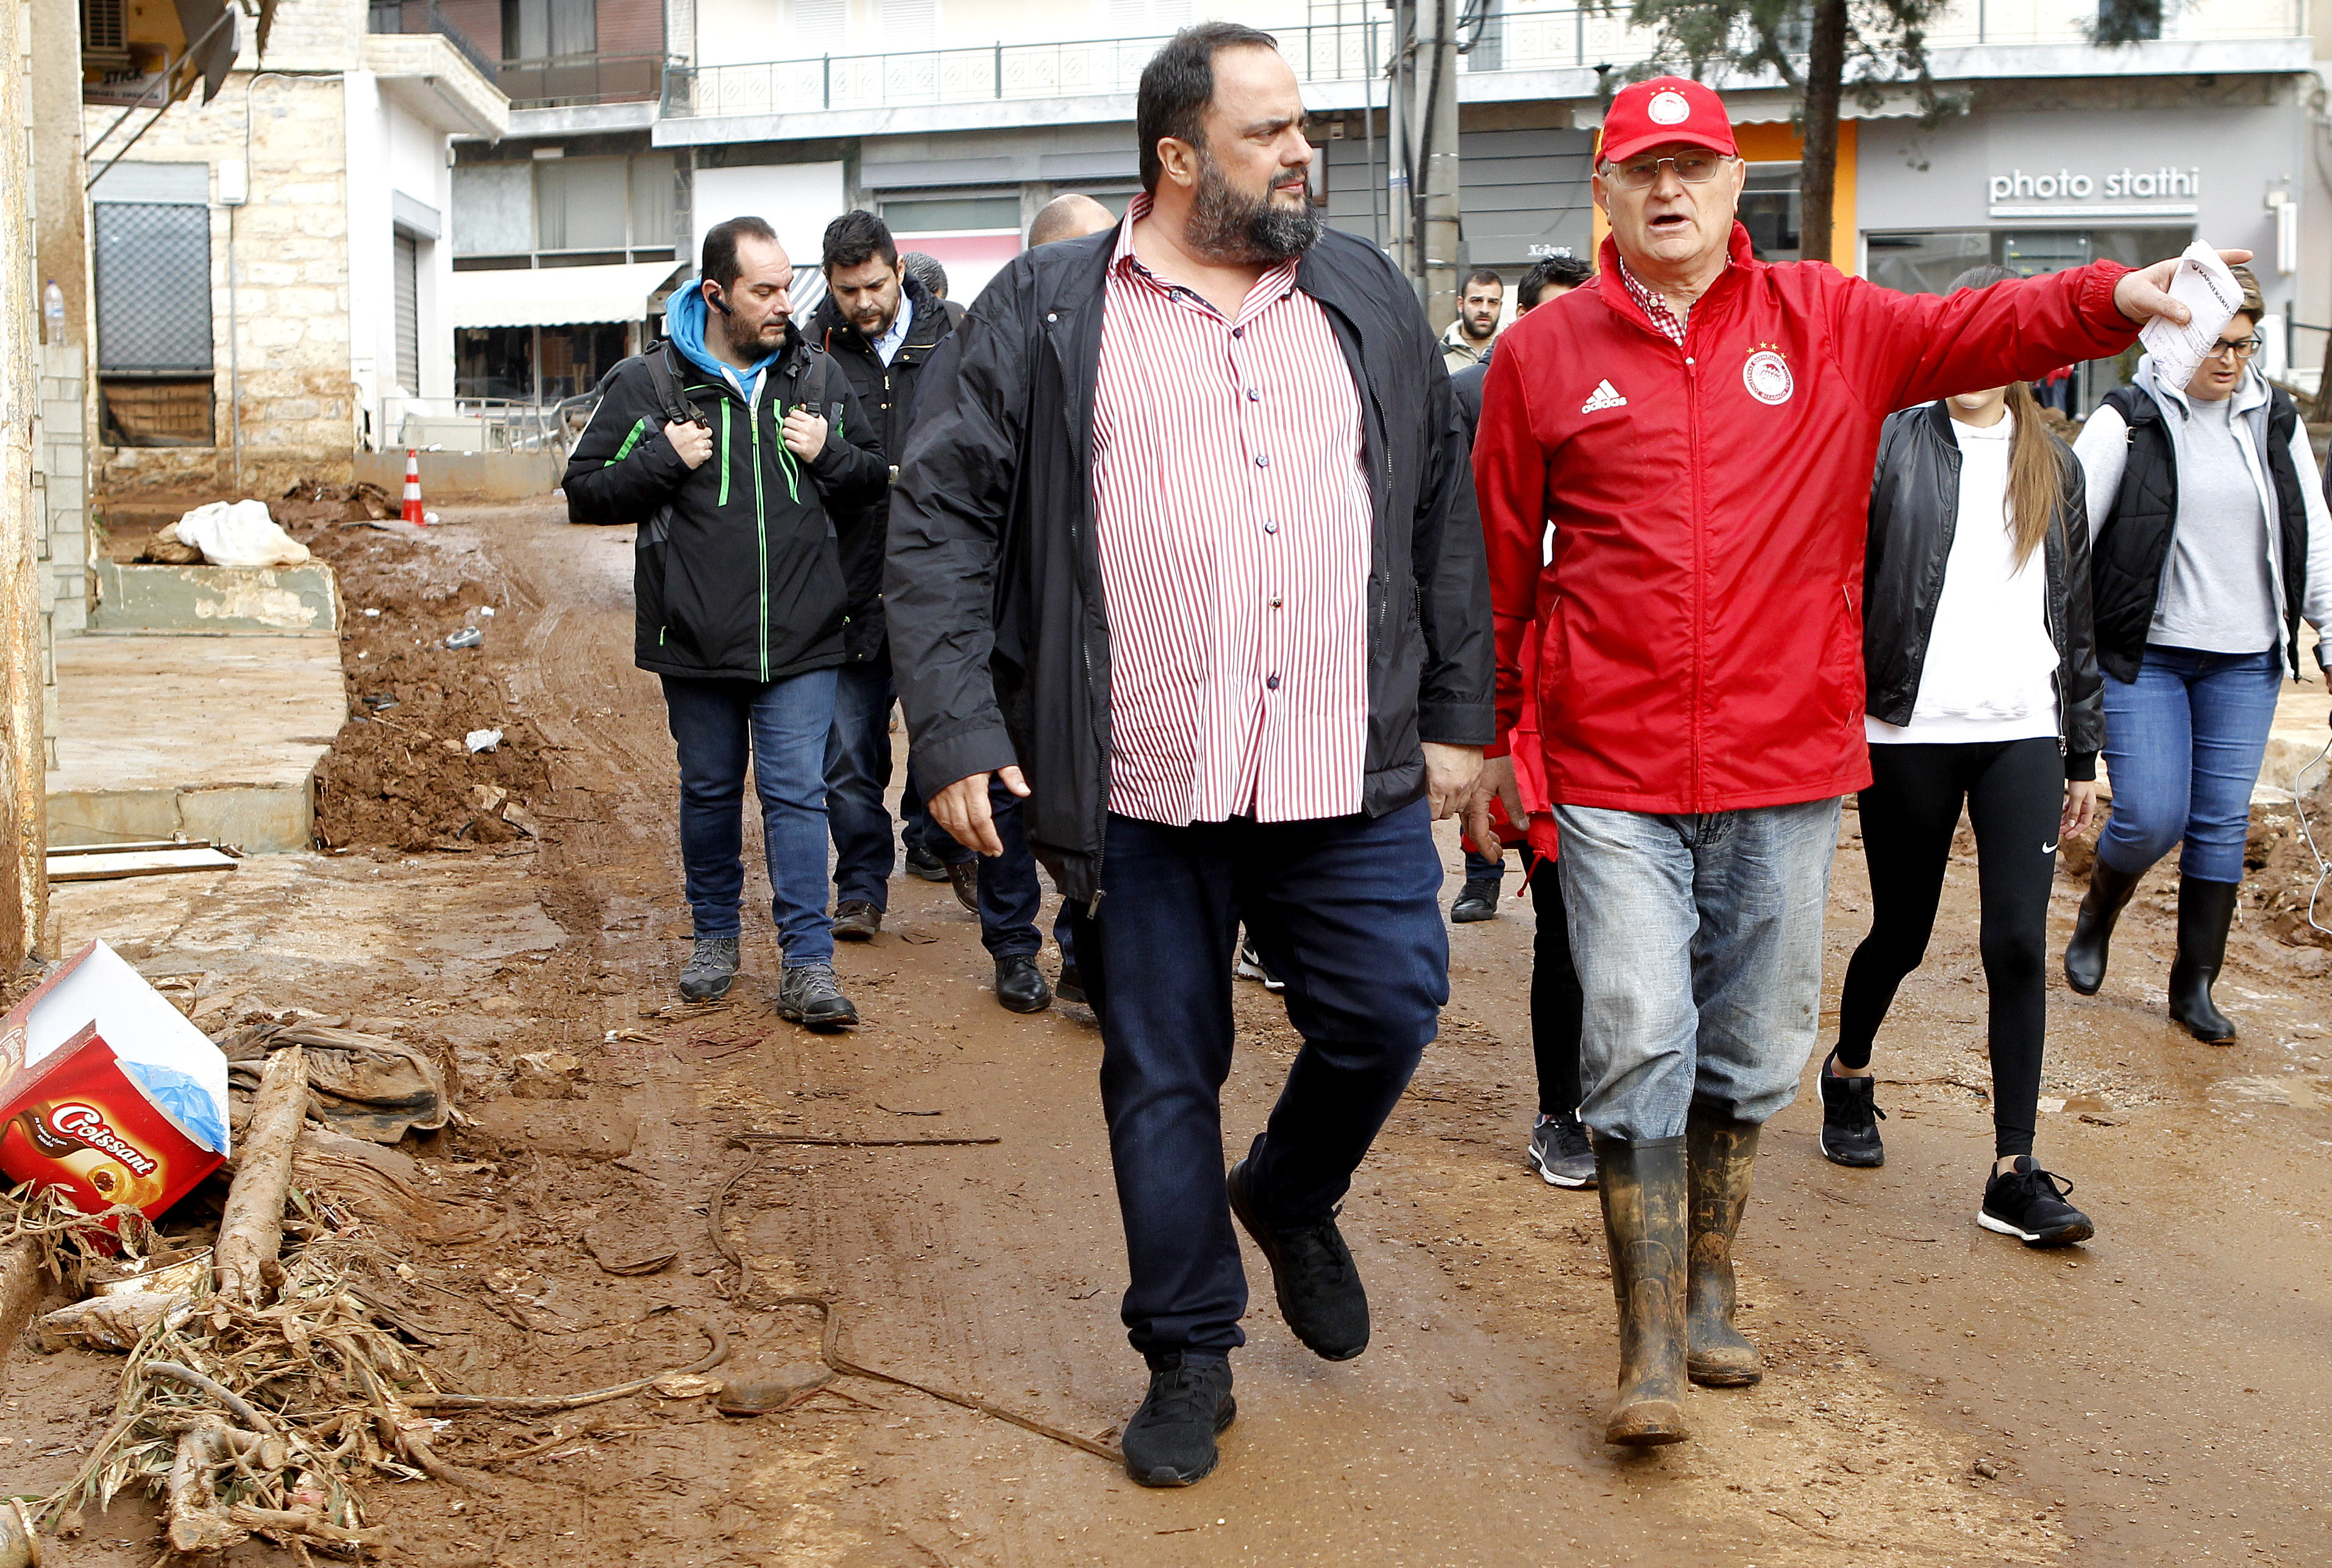 EVANGELOS MARINAKIS: “We are here for you, with works”